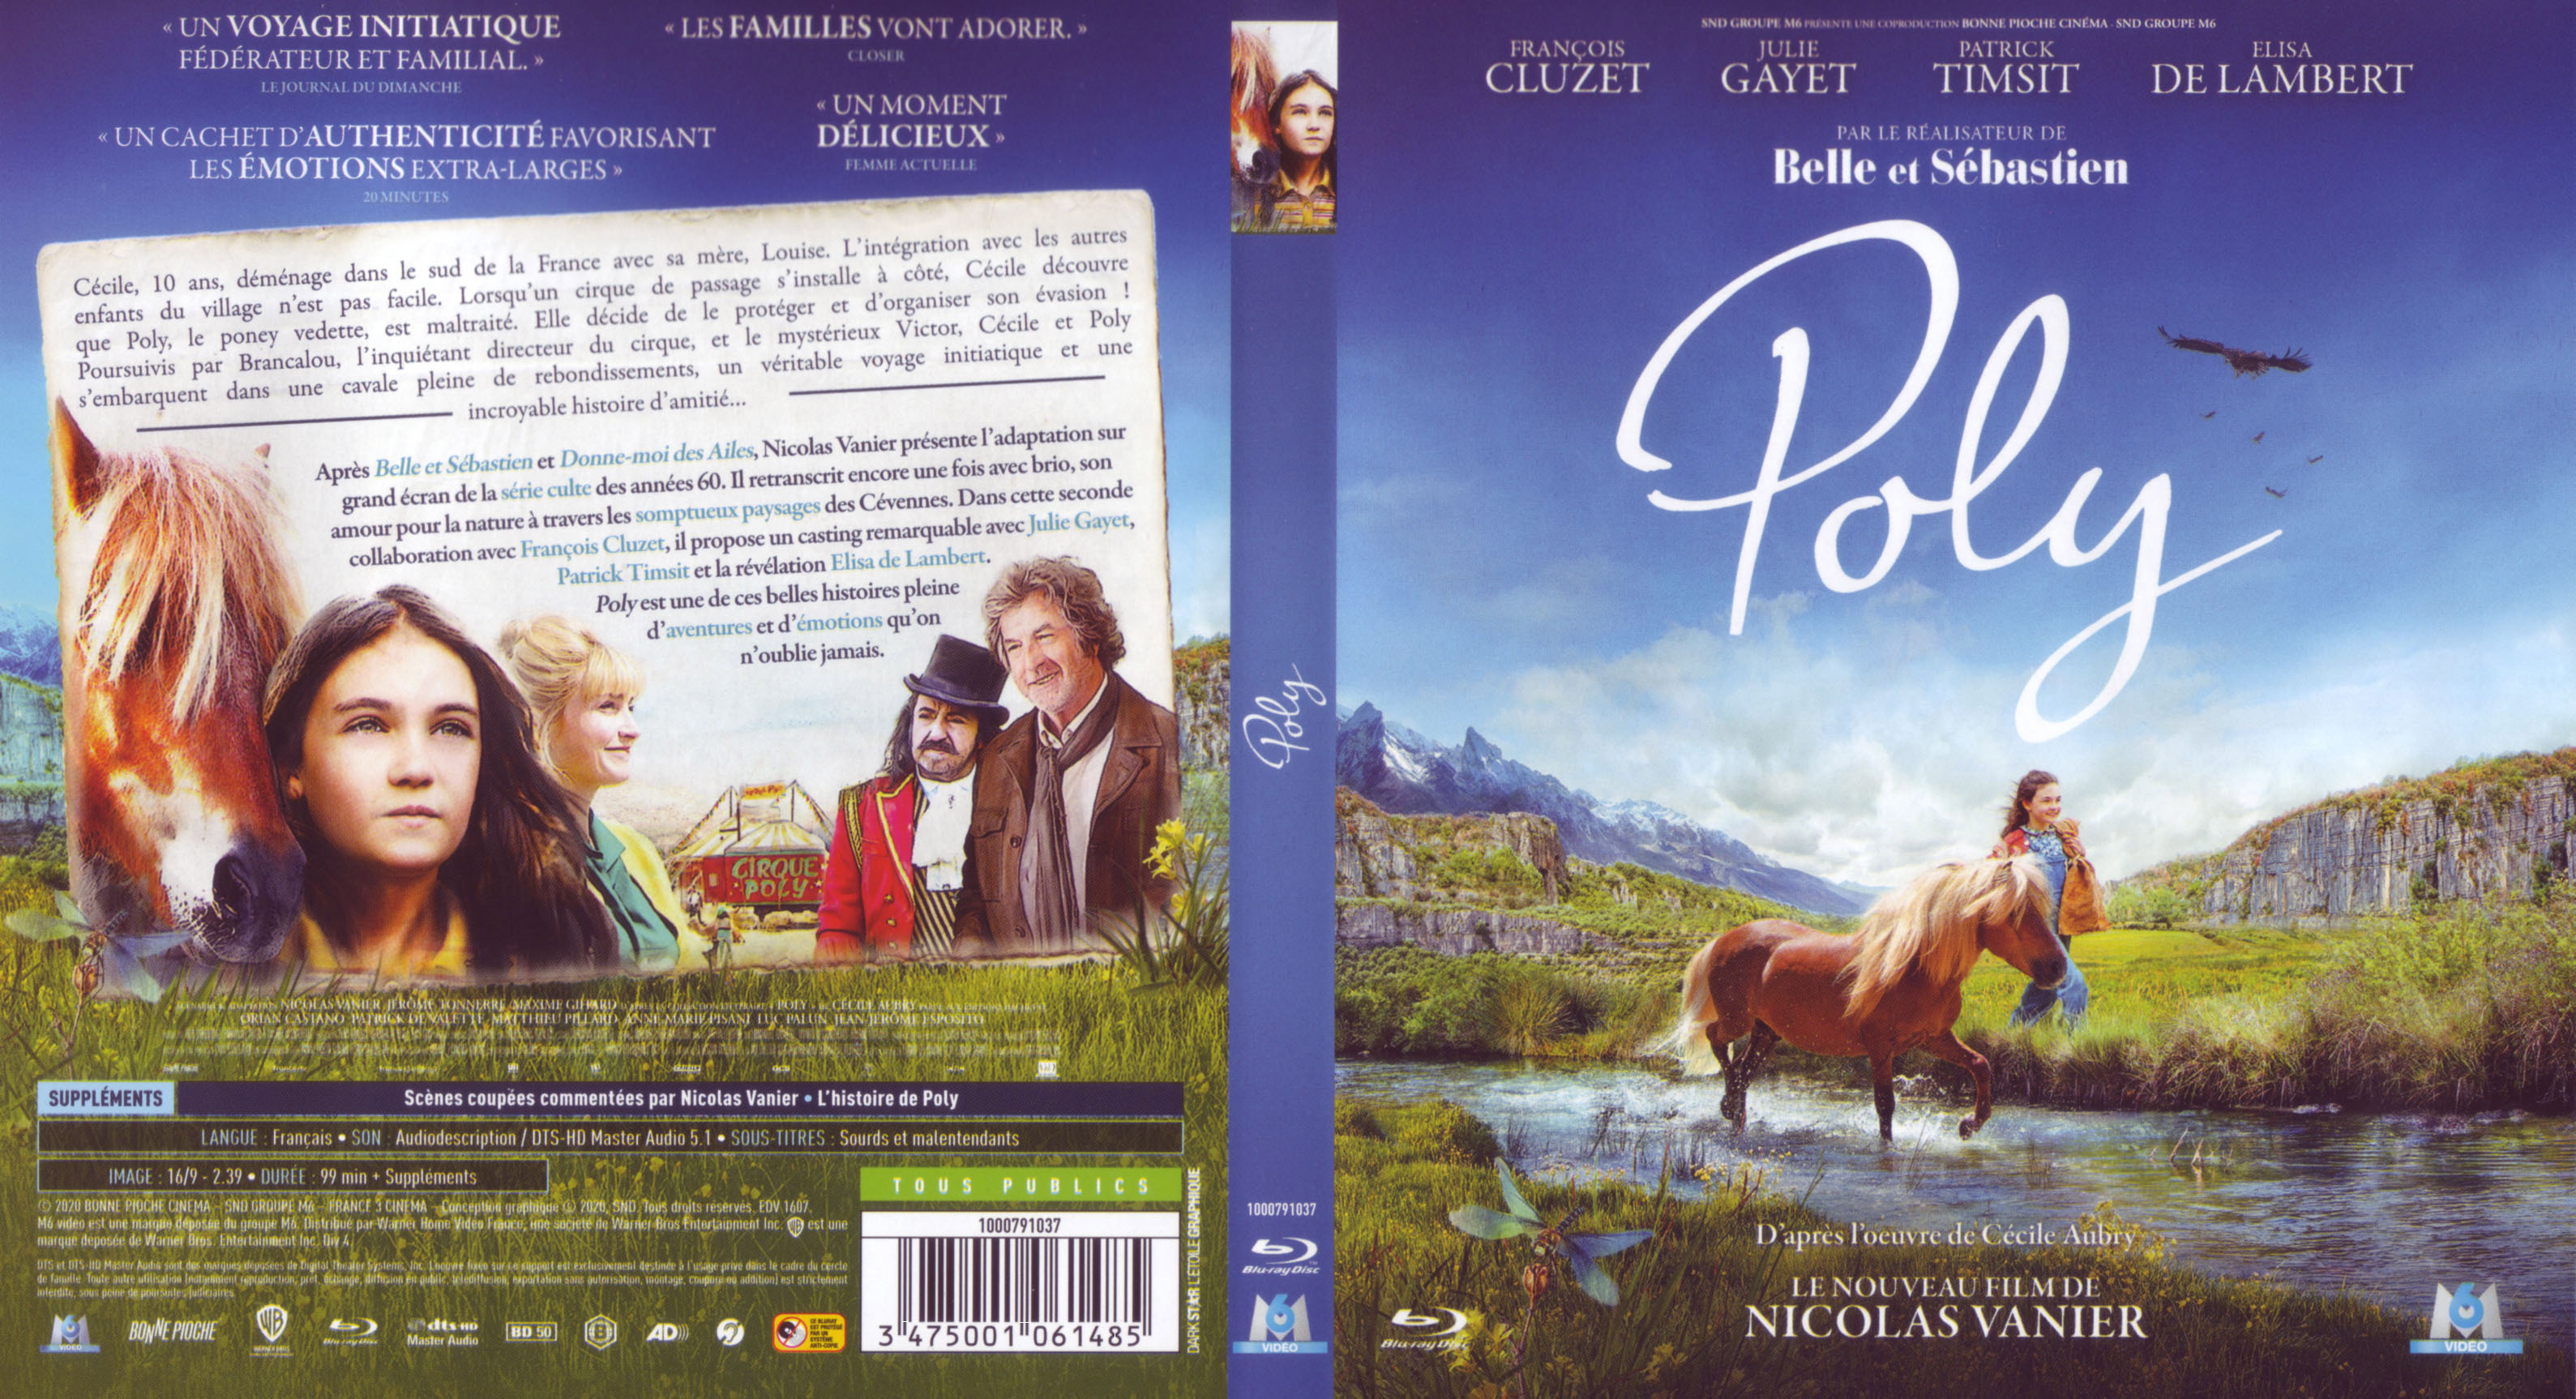 Jaquette DVD Poly (BLU-RAY)